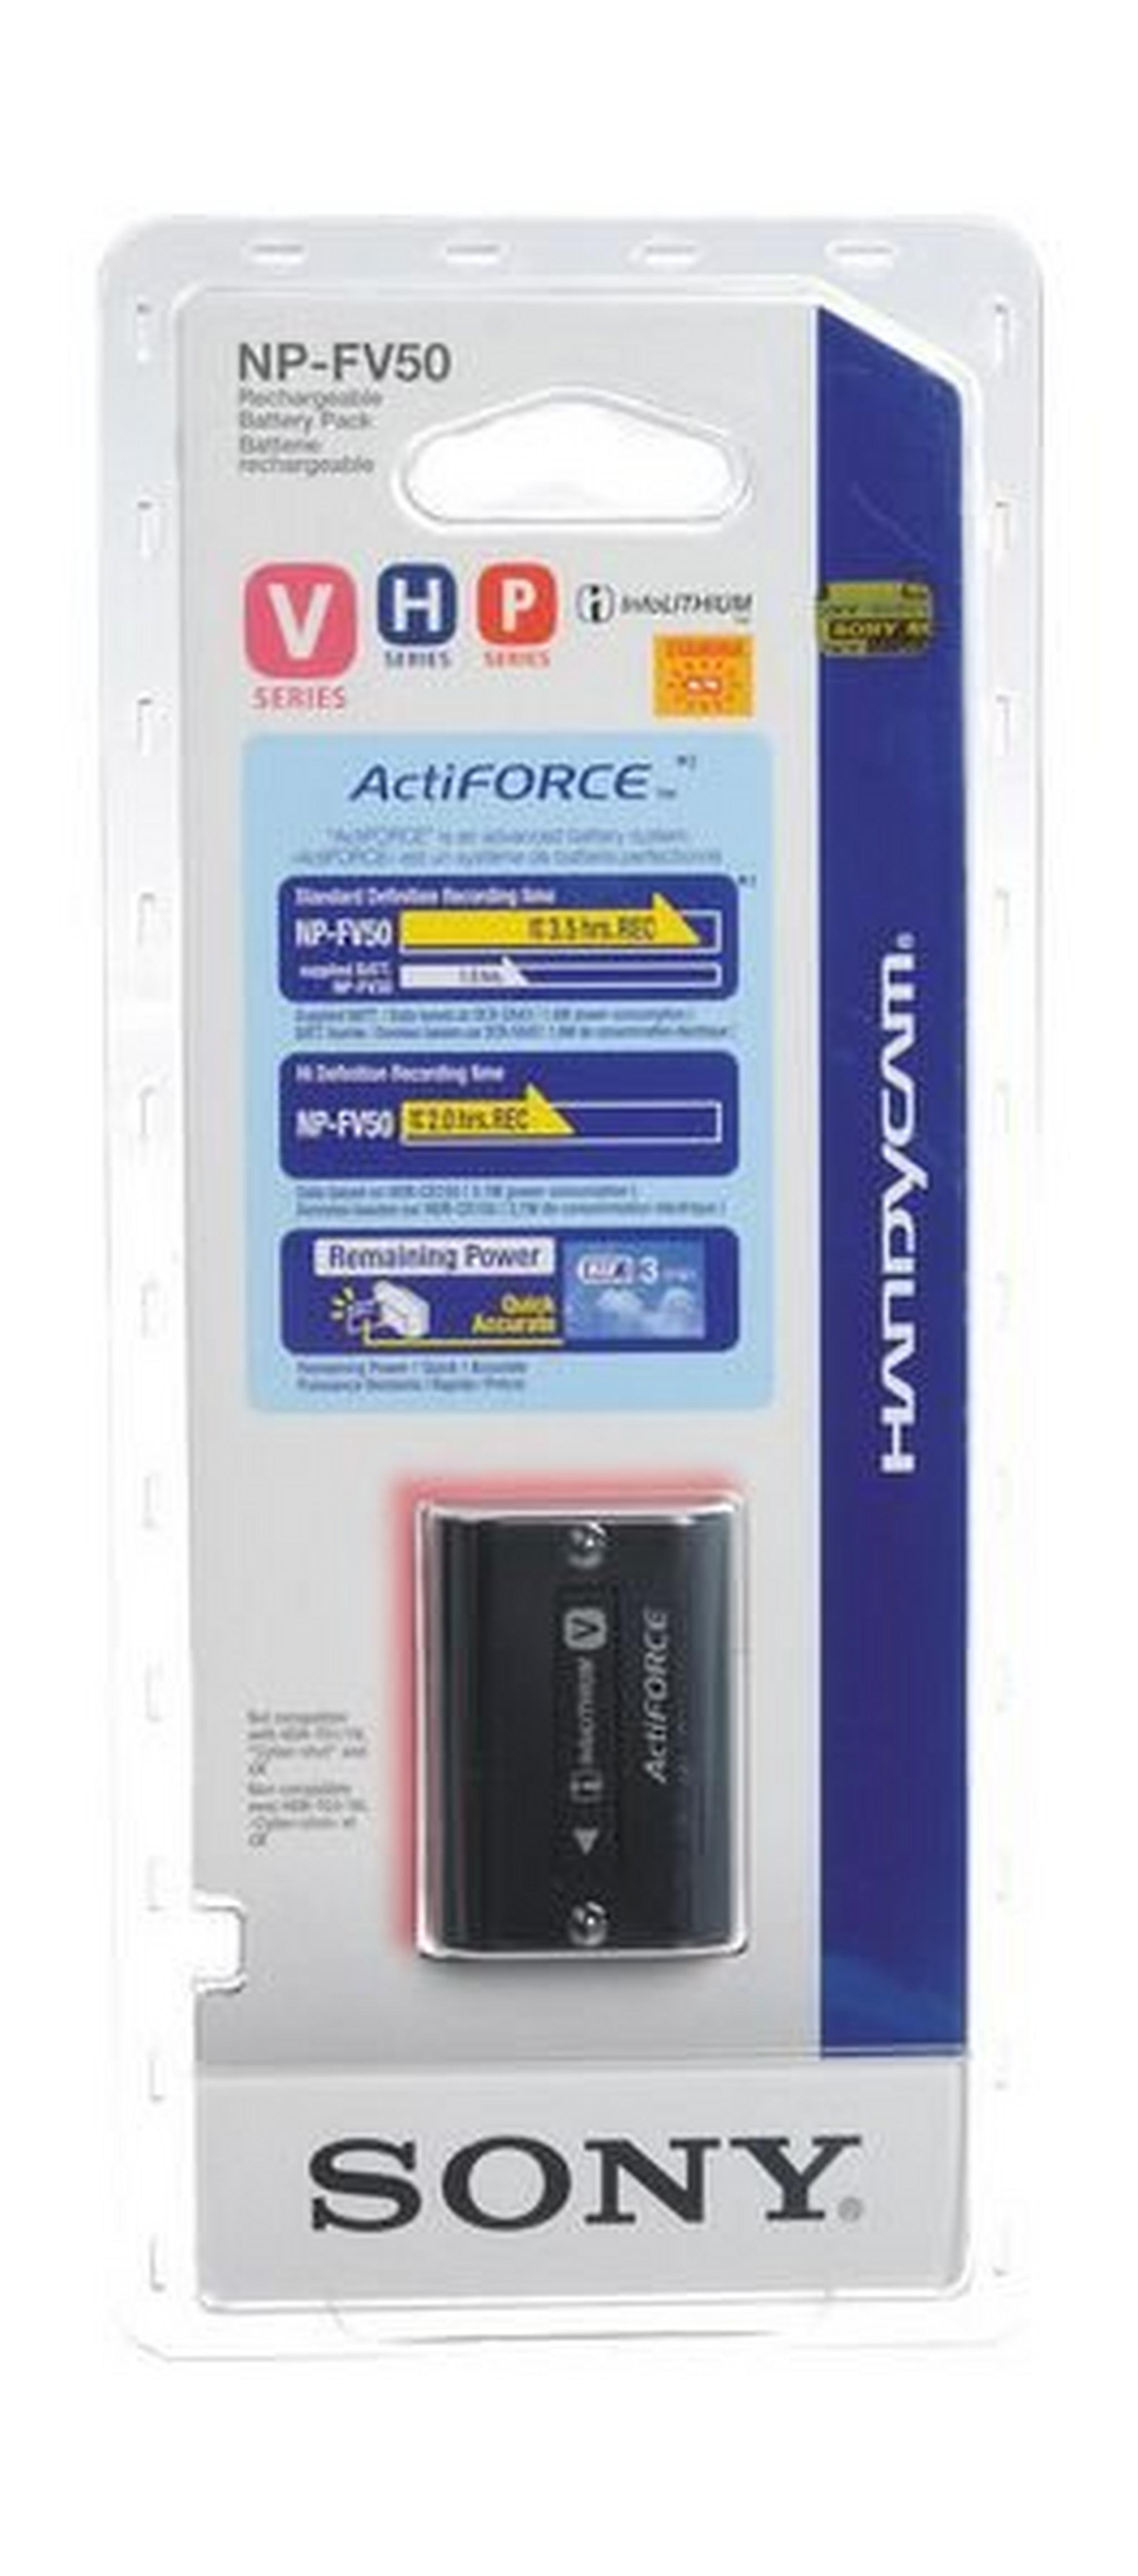 Sony NP-FV50 Rechargeable 1030mAh Battery Pack